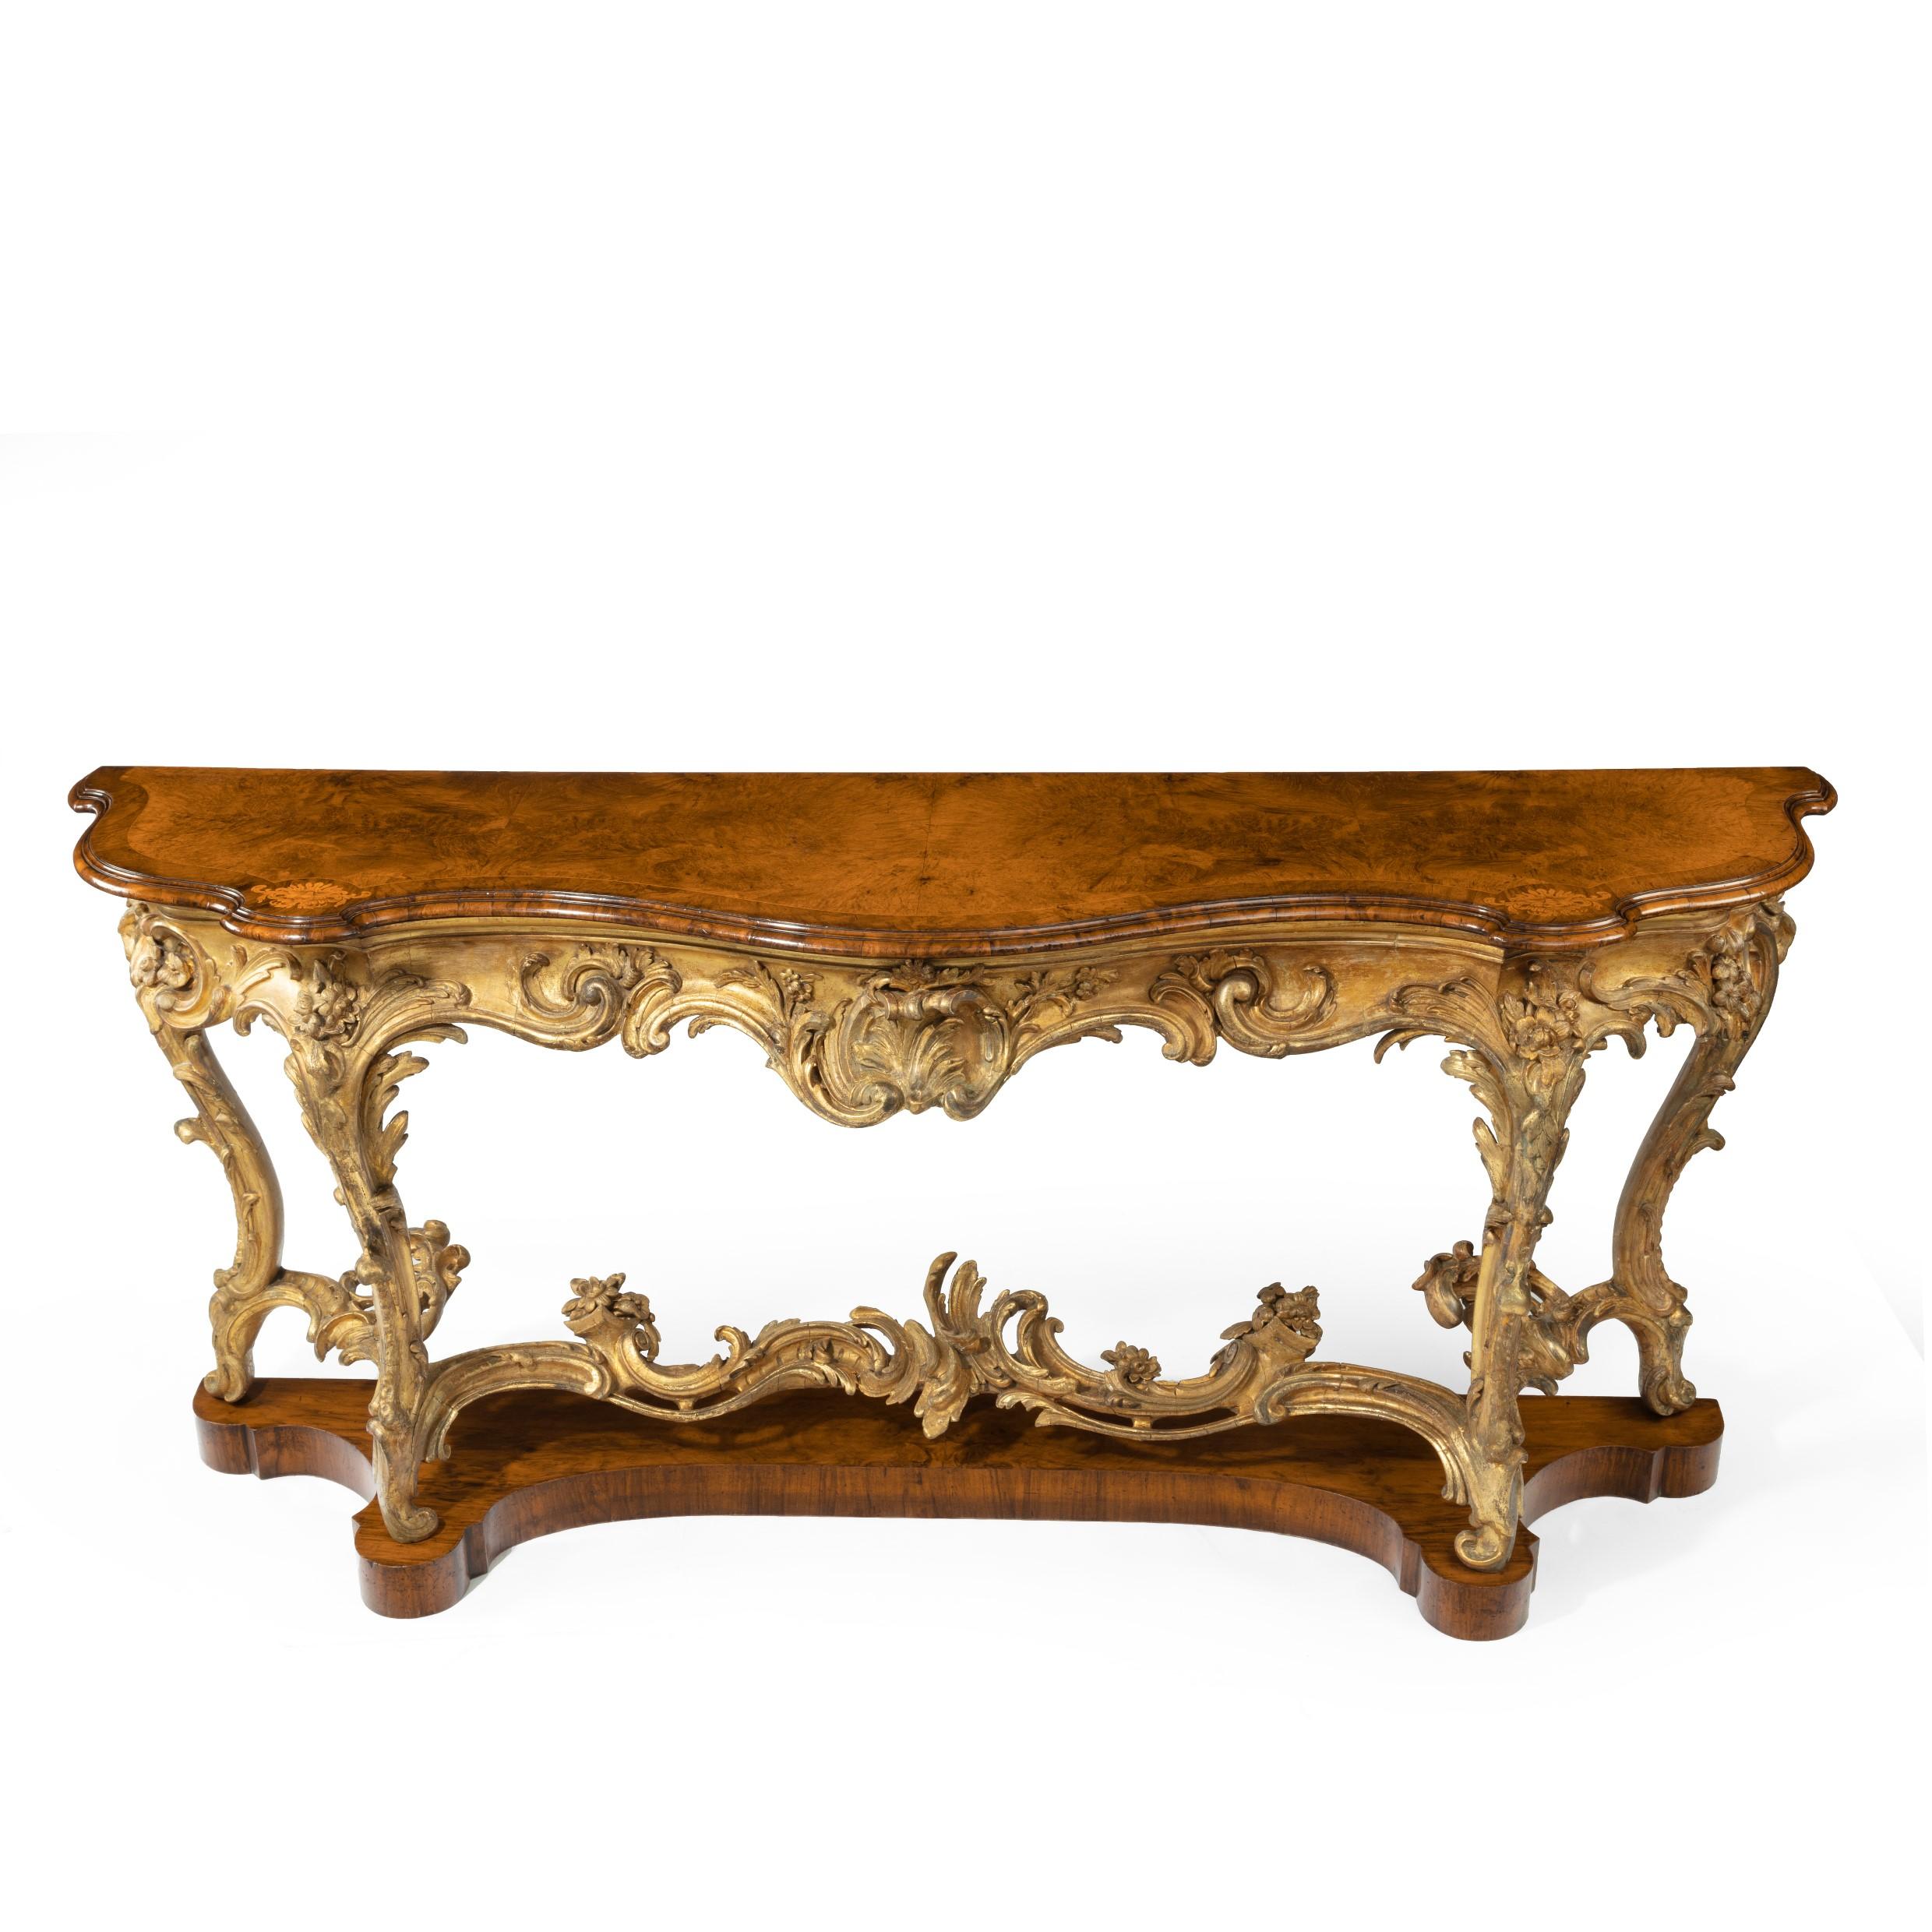 A mid Victorian wood and gilt console table, the shaped top with an amboyna field within wide walnut cross-banding inlaid with boxwood lion’s masks, raised upon a flamboyant gilt gesso base in the rococo taste with C-scrolls, acanthus leaves,